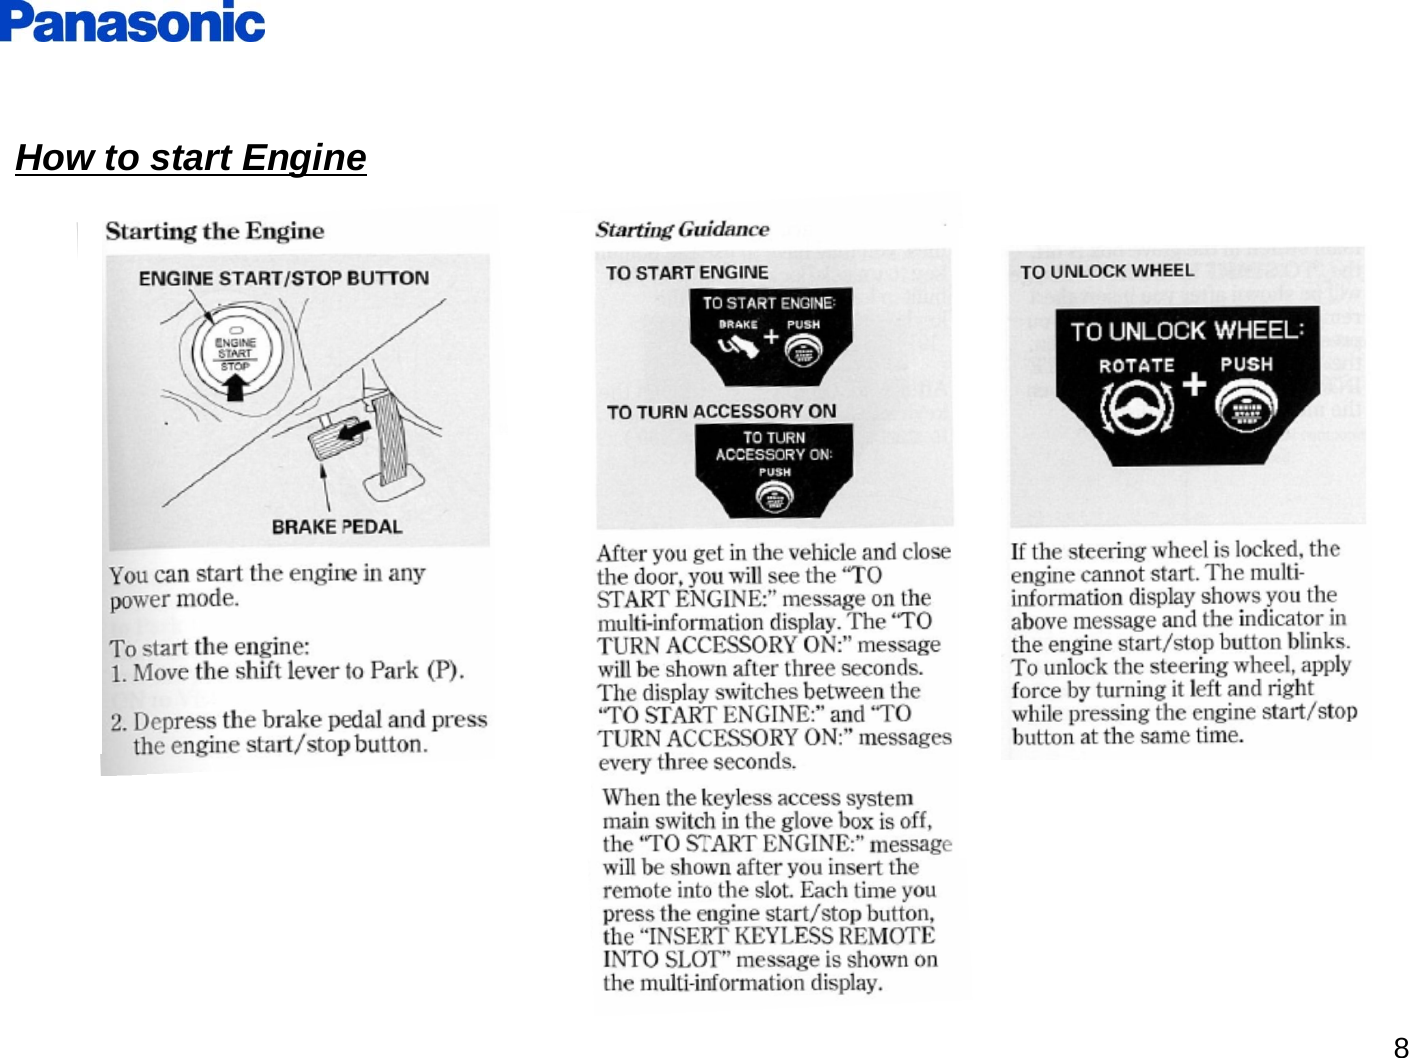 8How to start Engine